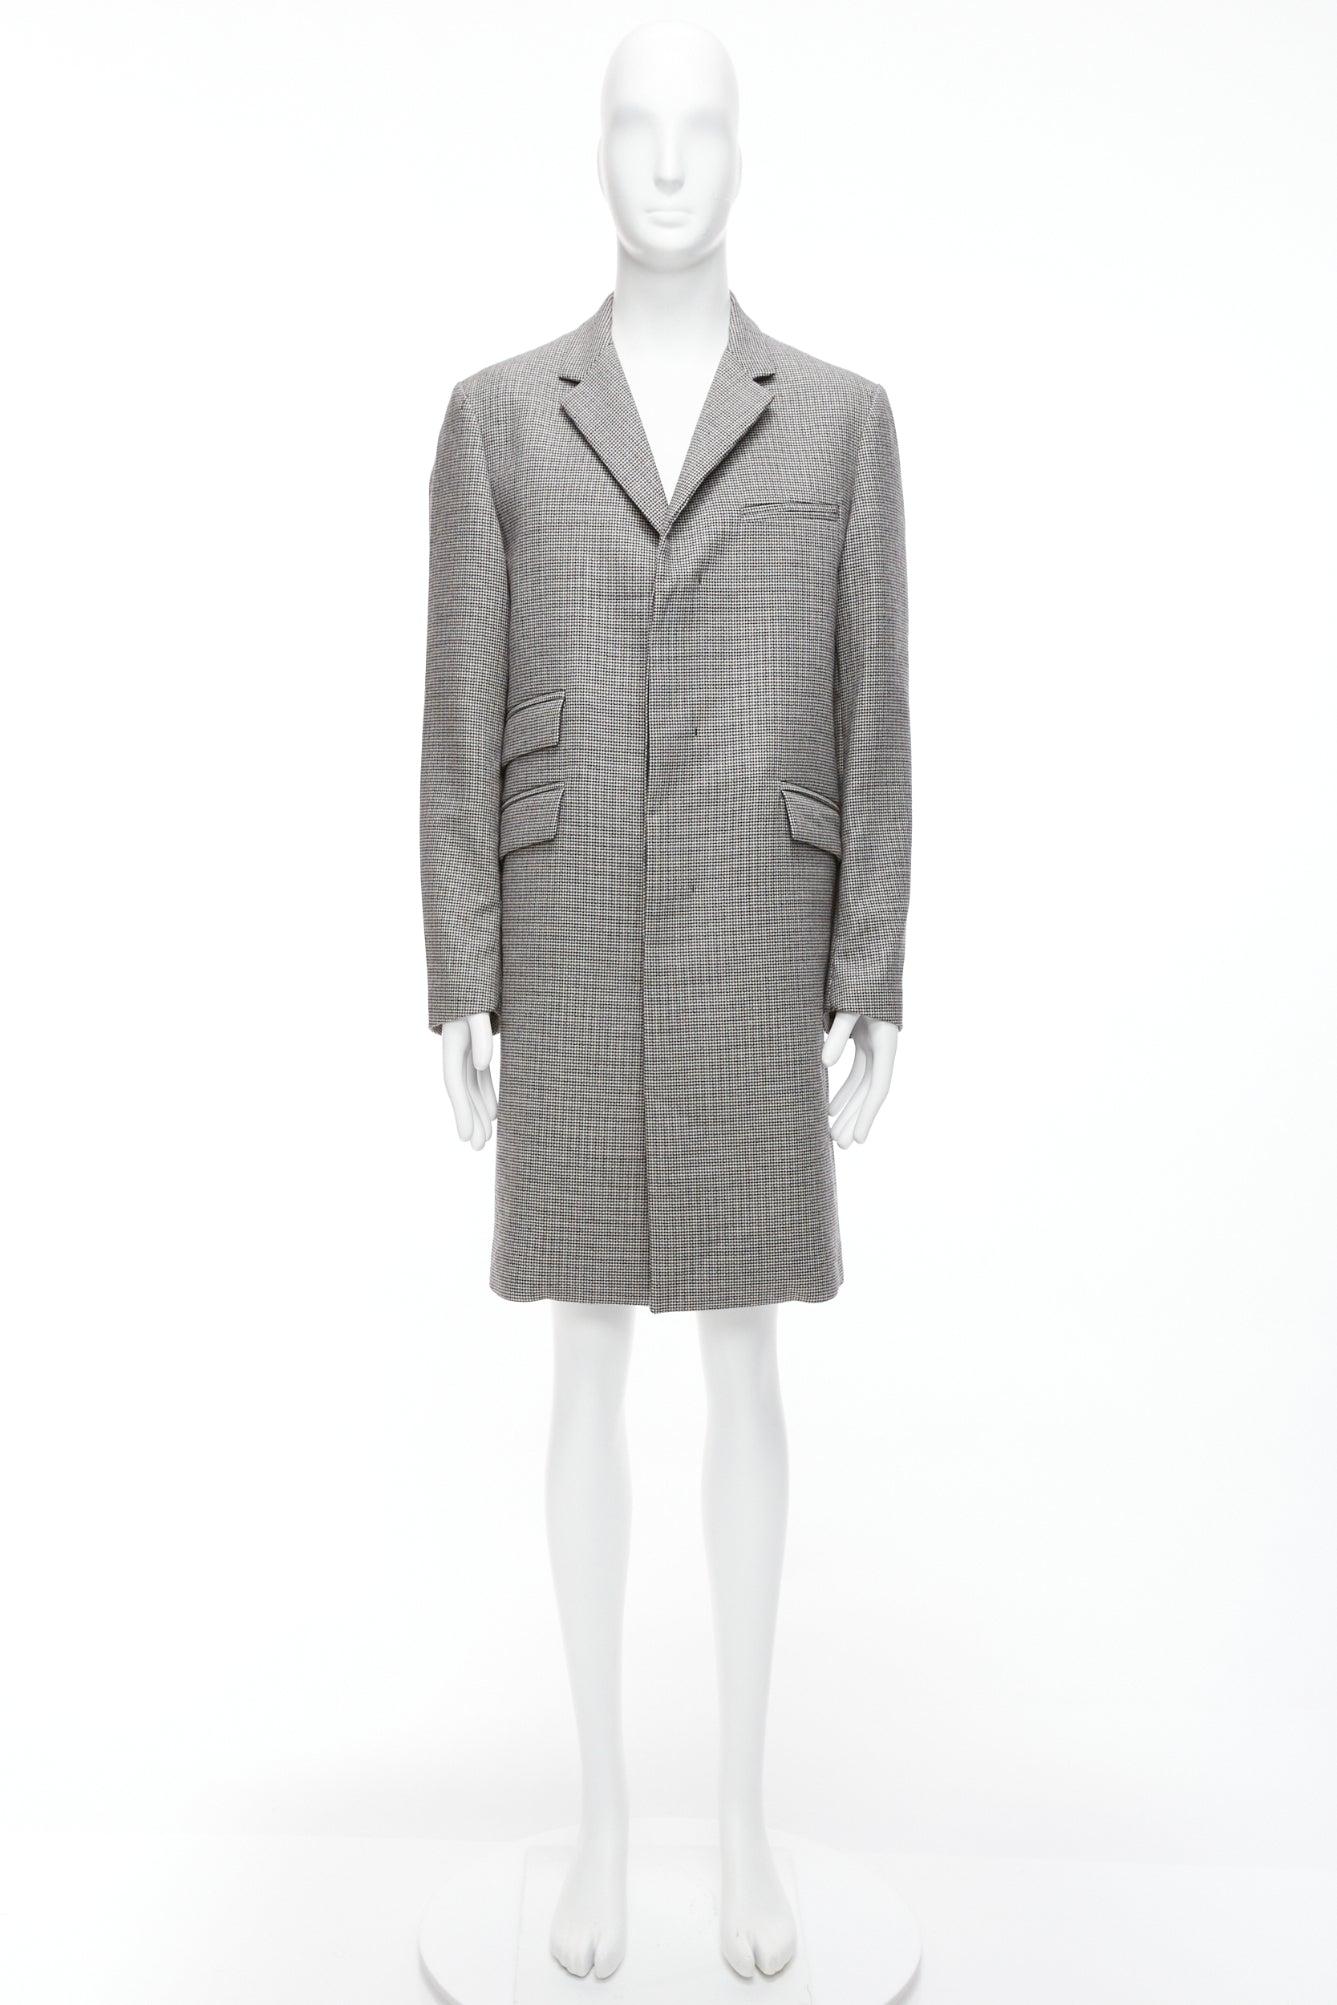 MARNI grey houndstooth wool blend invisible placket longline coat IT48 M For Sale 6